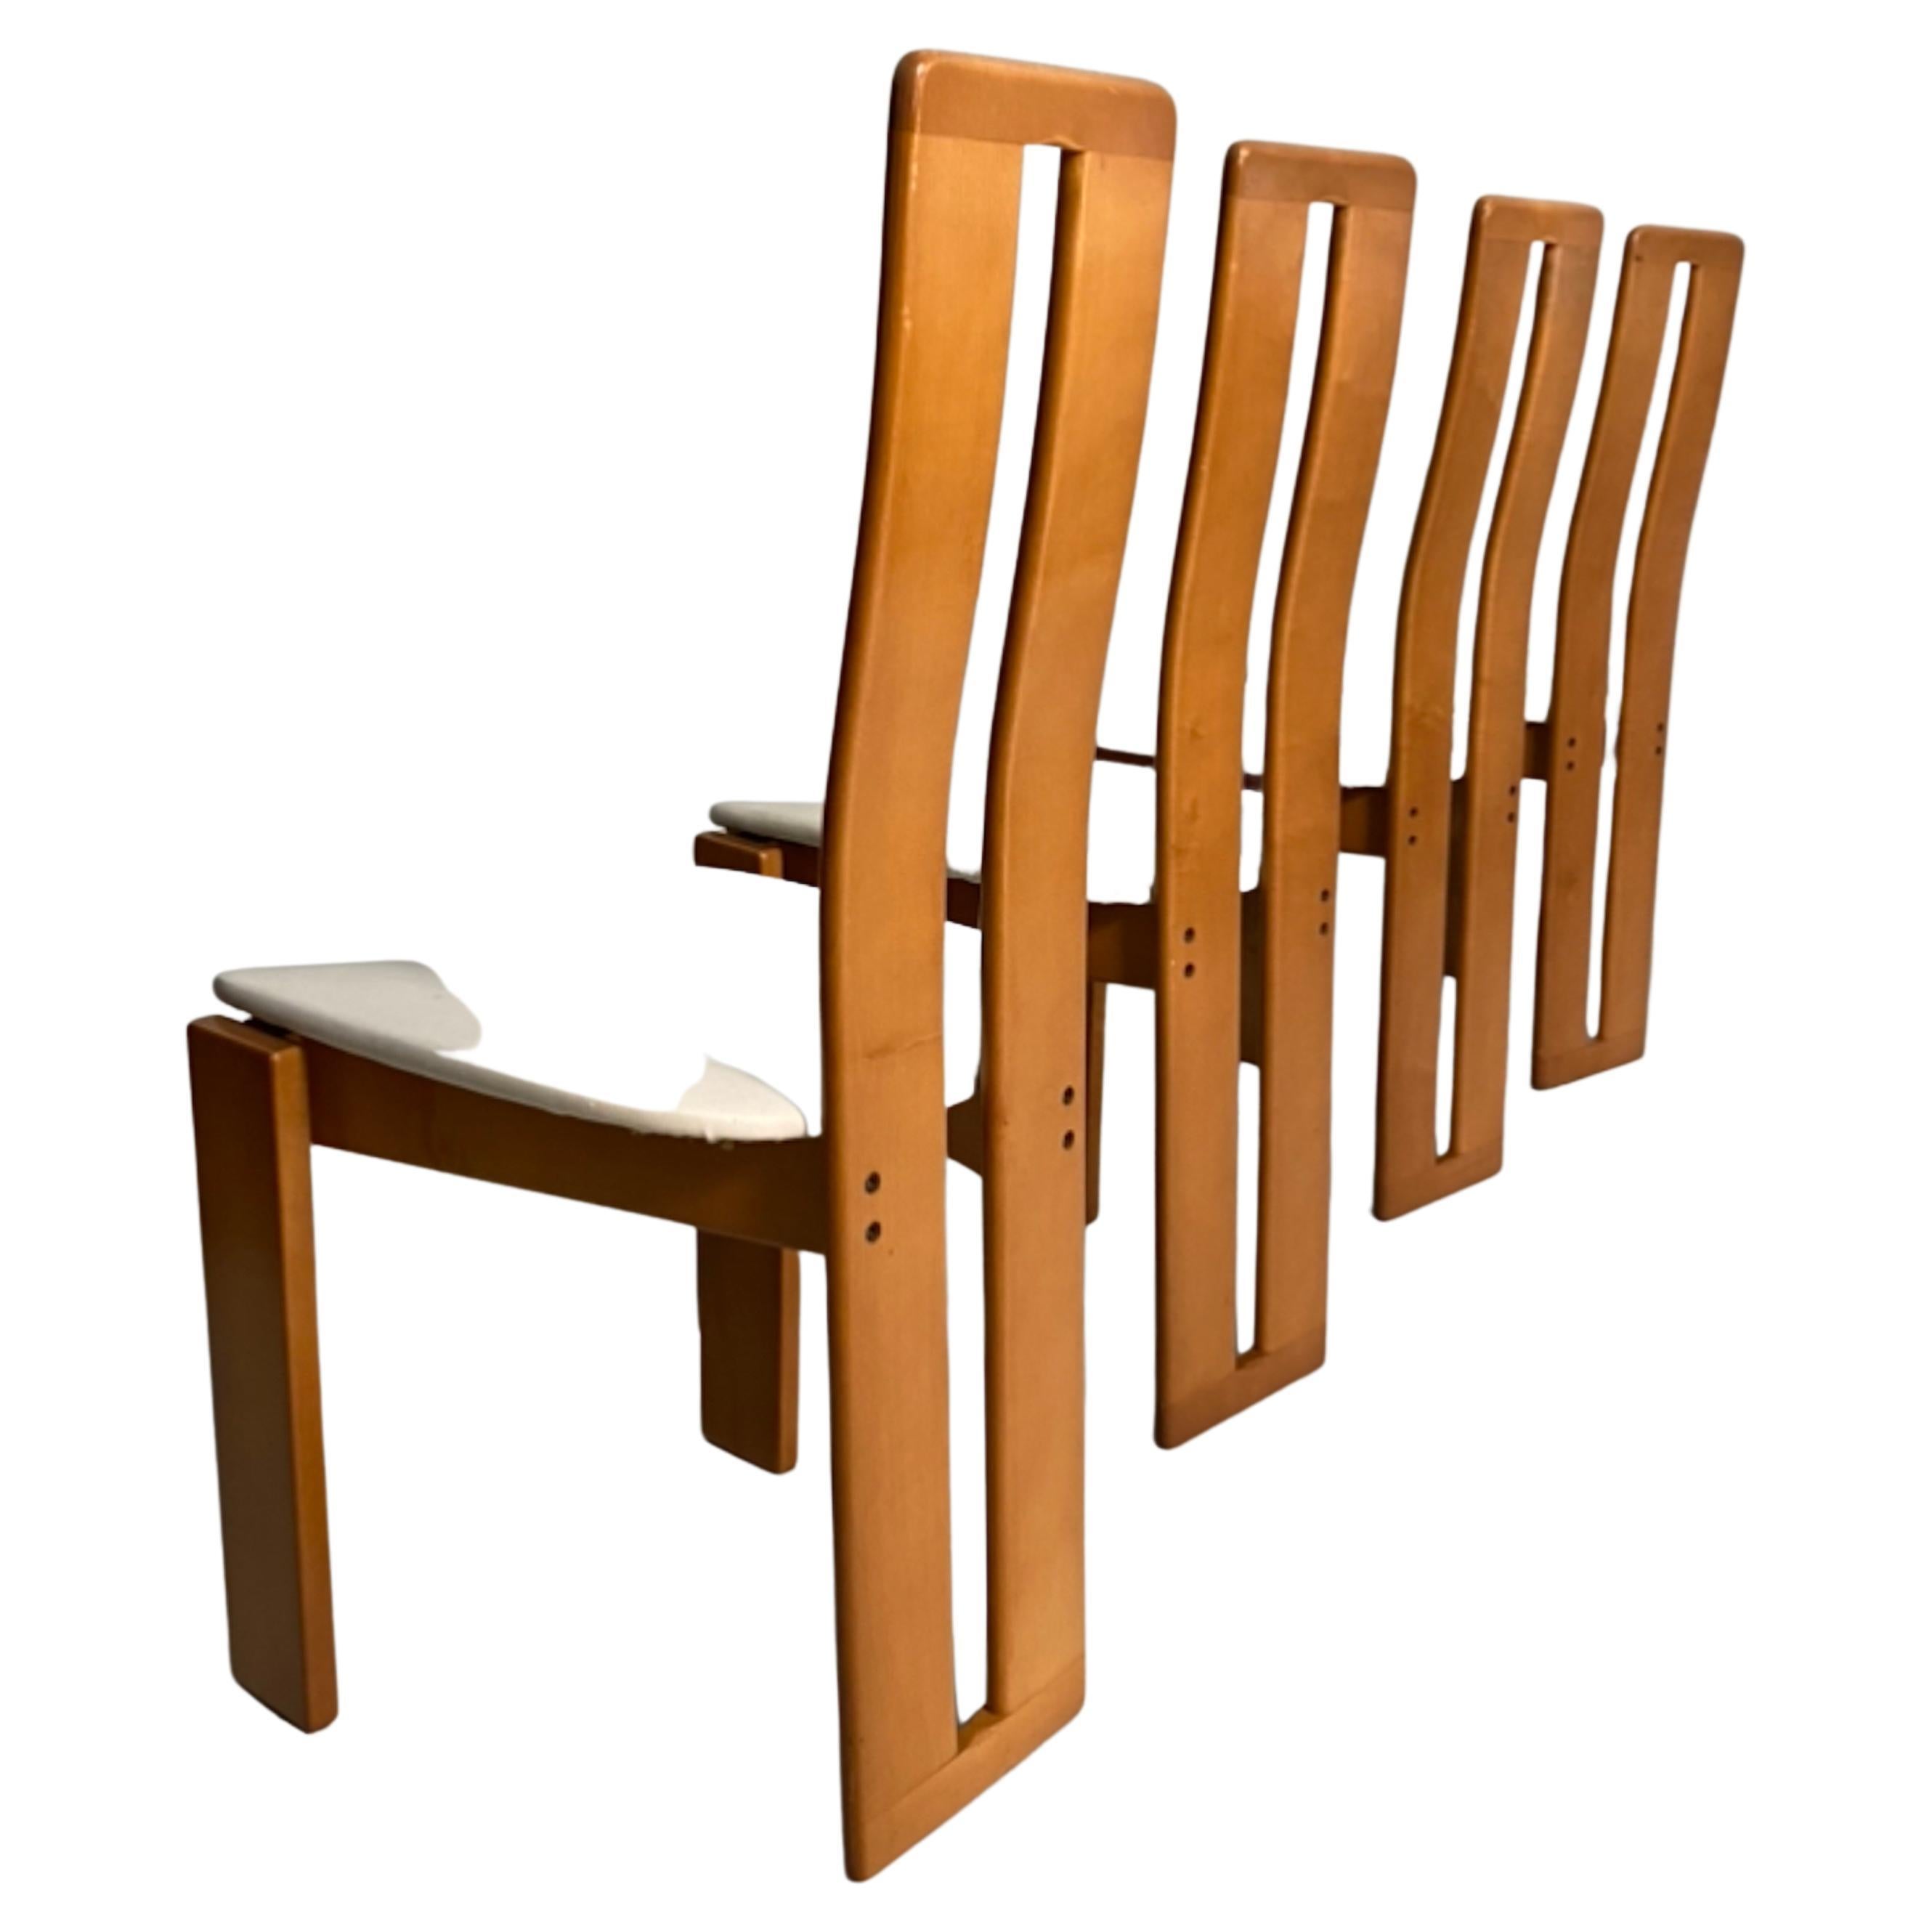 Set of four chairs by Mario Marenco, Mobil Girgi, Italy, 1970s